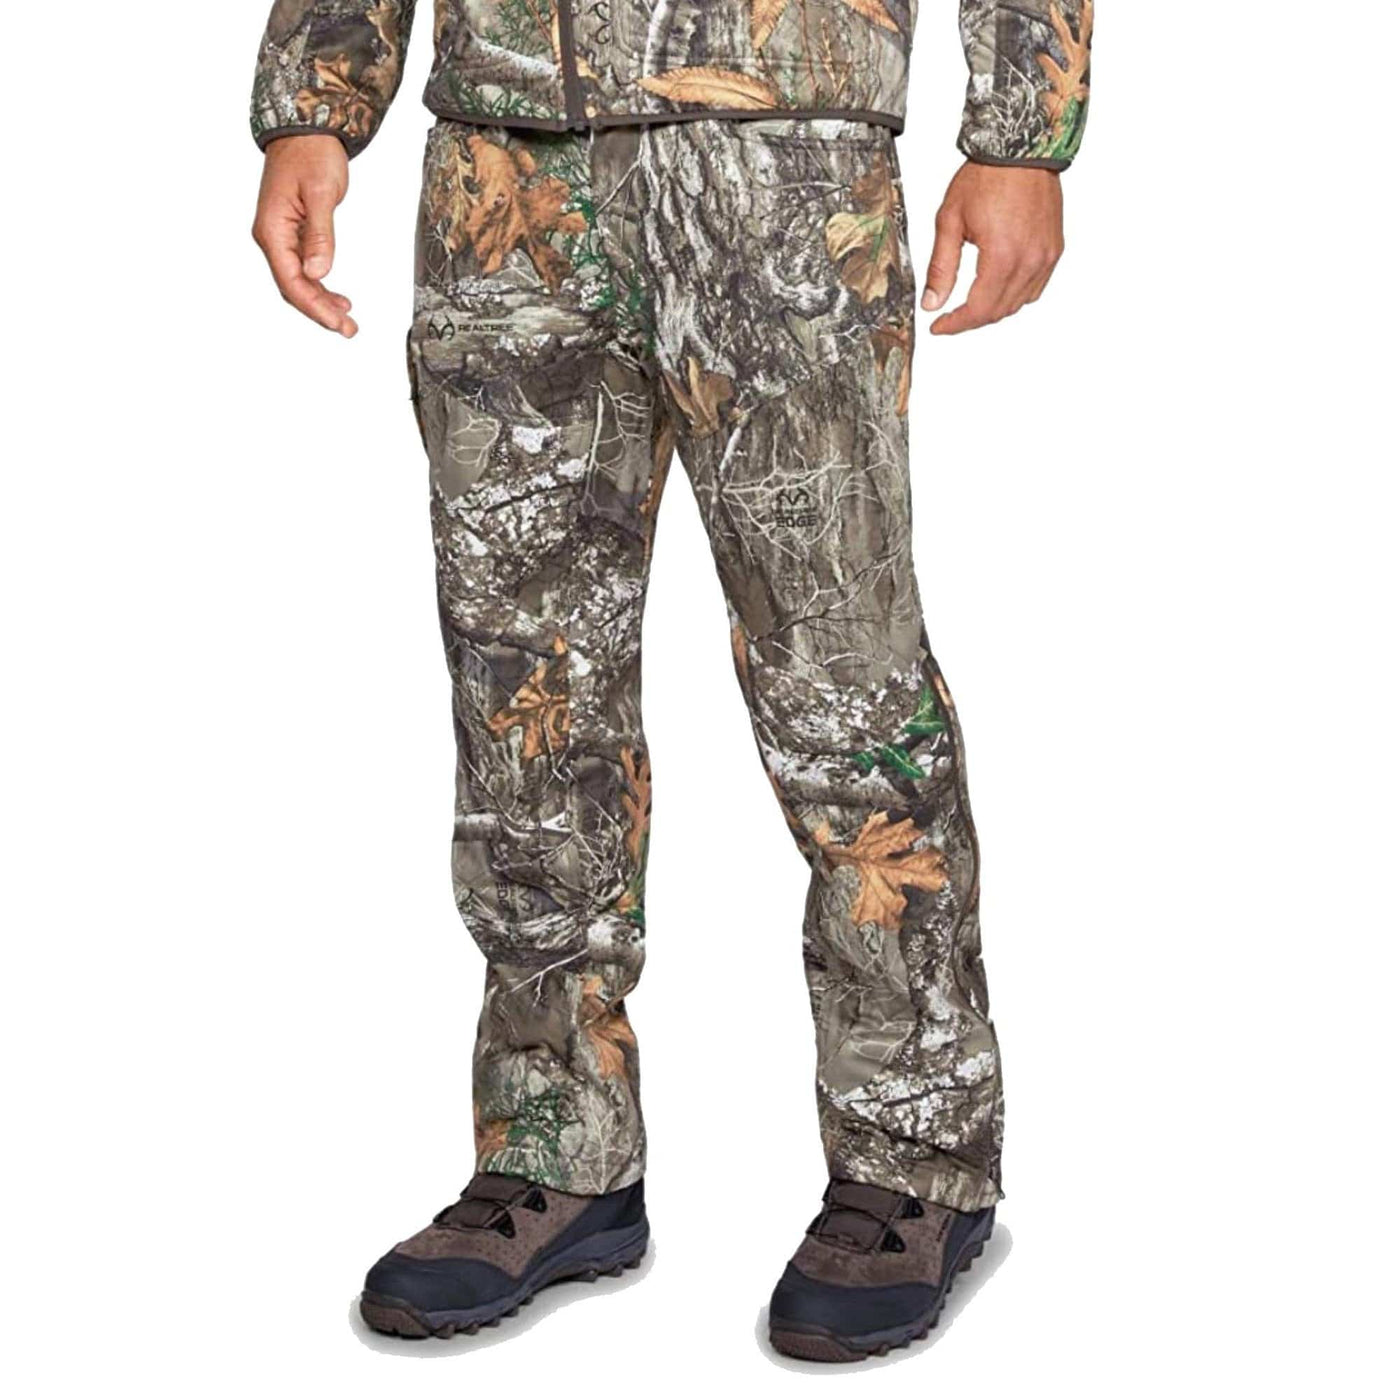 Under Armour Under Armour Brow Tine ColdGear Infrared Pants Realtree Edge / Small Clothing